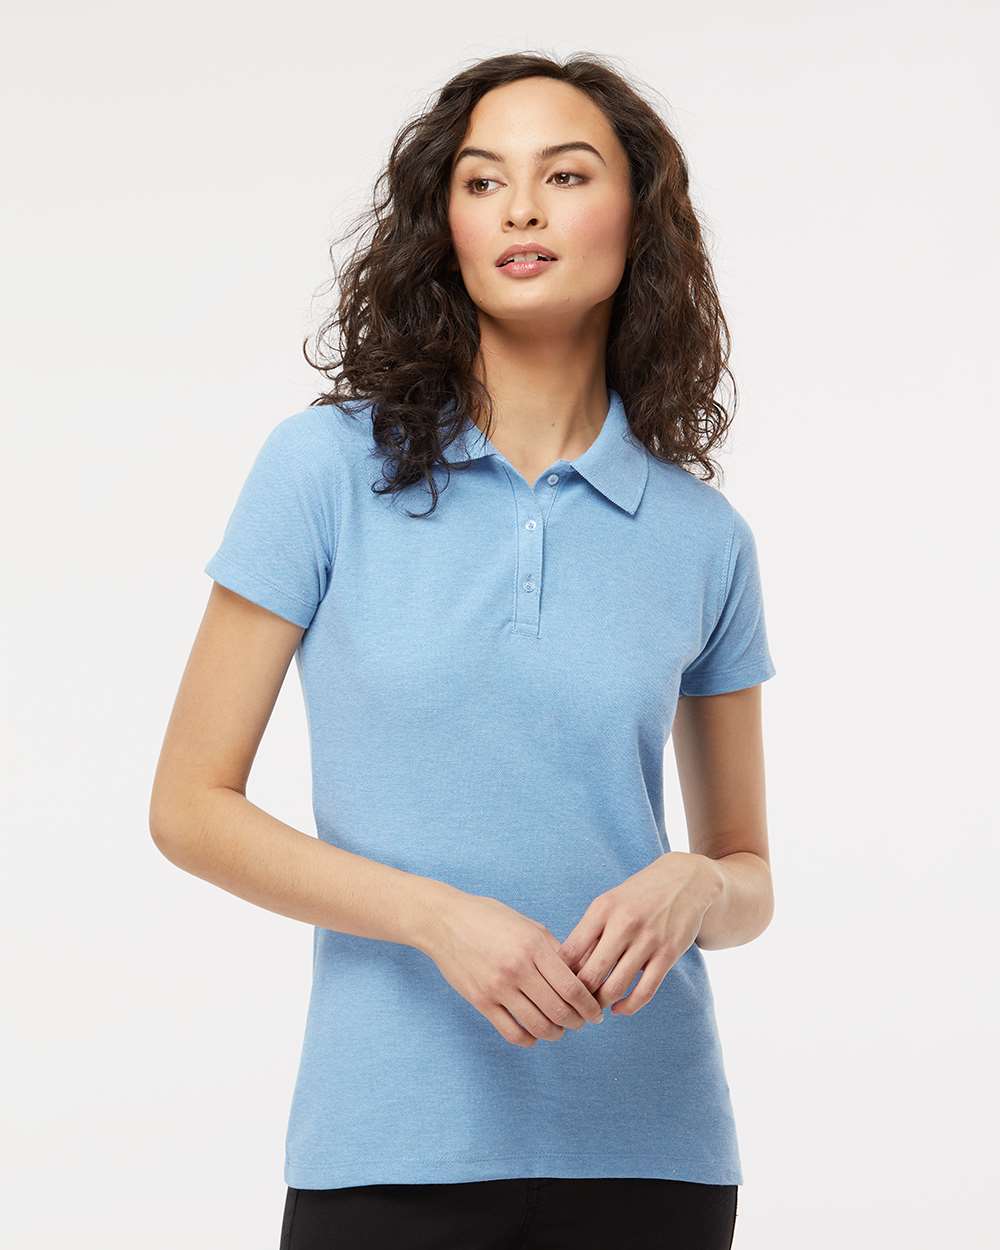 M&O Women’s Soft Touch Polo #7007 Light Blue Heather